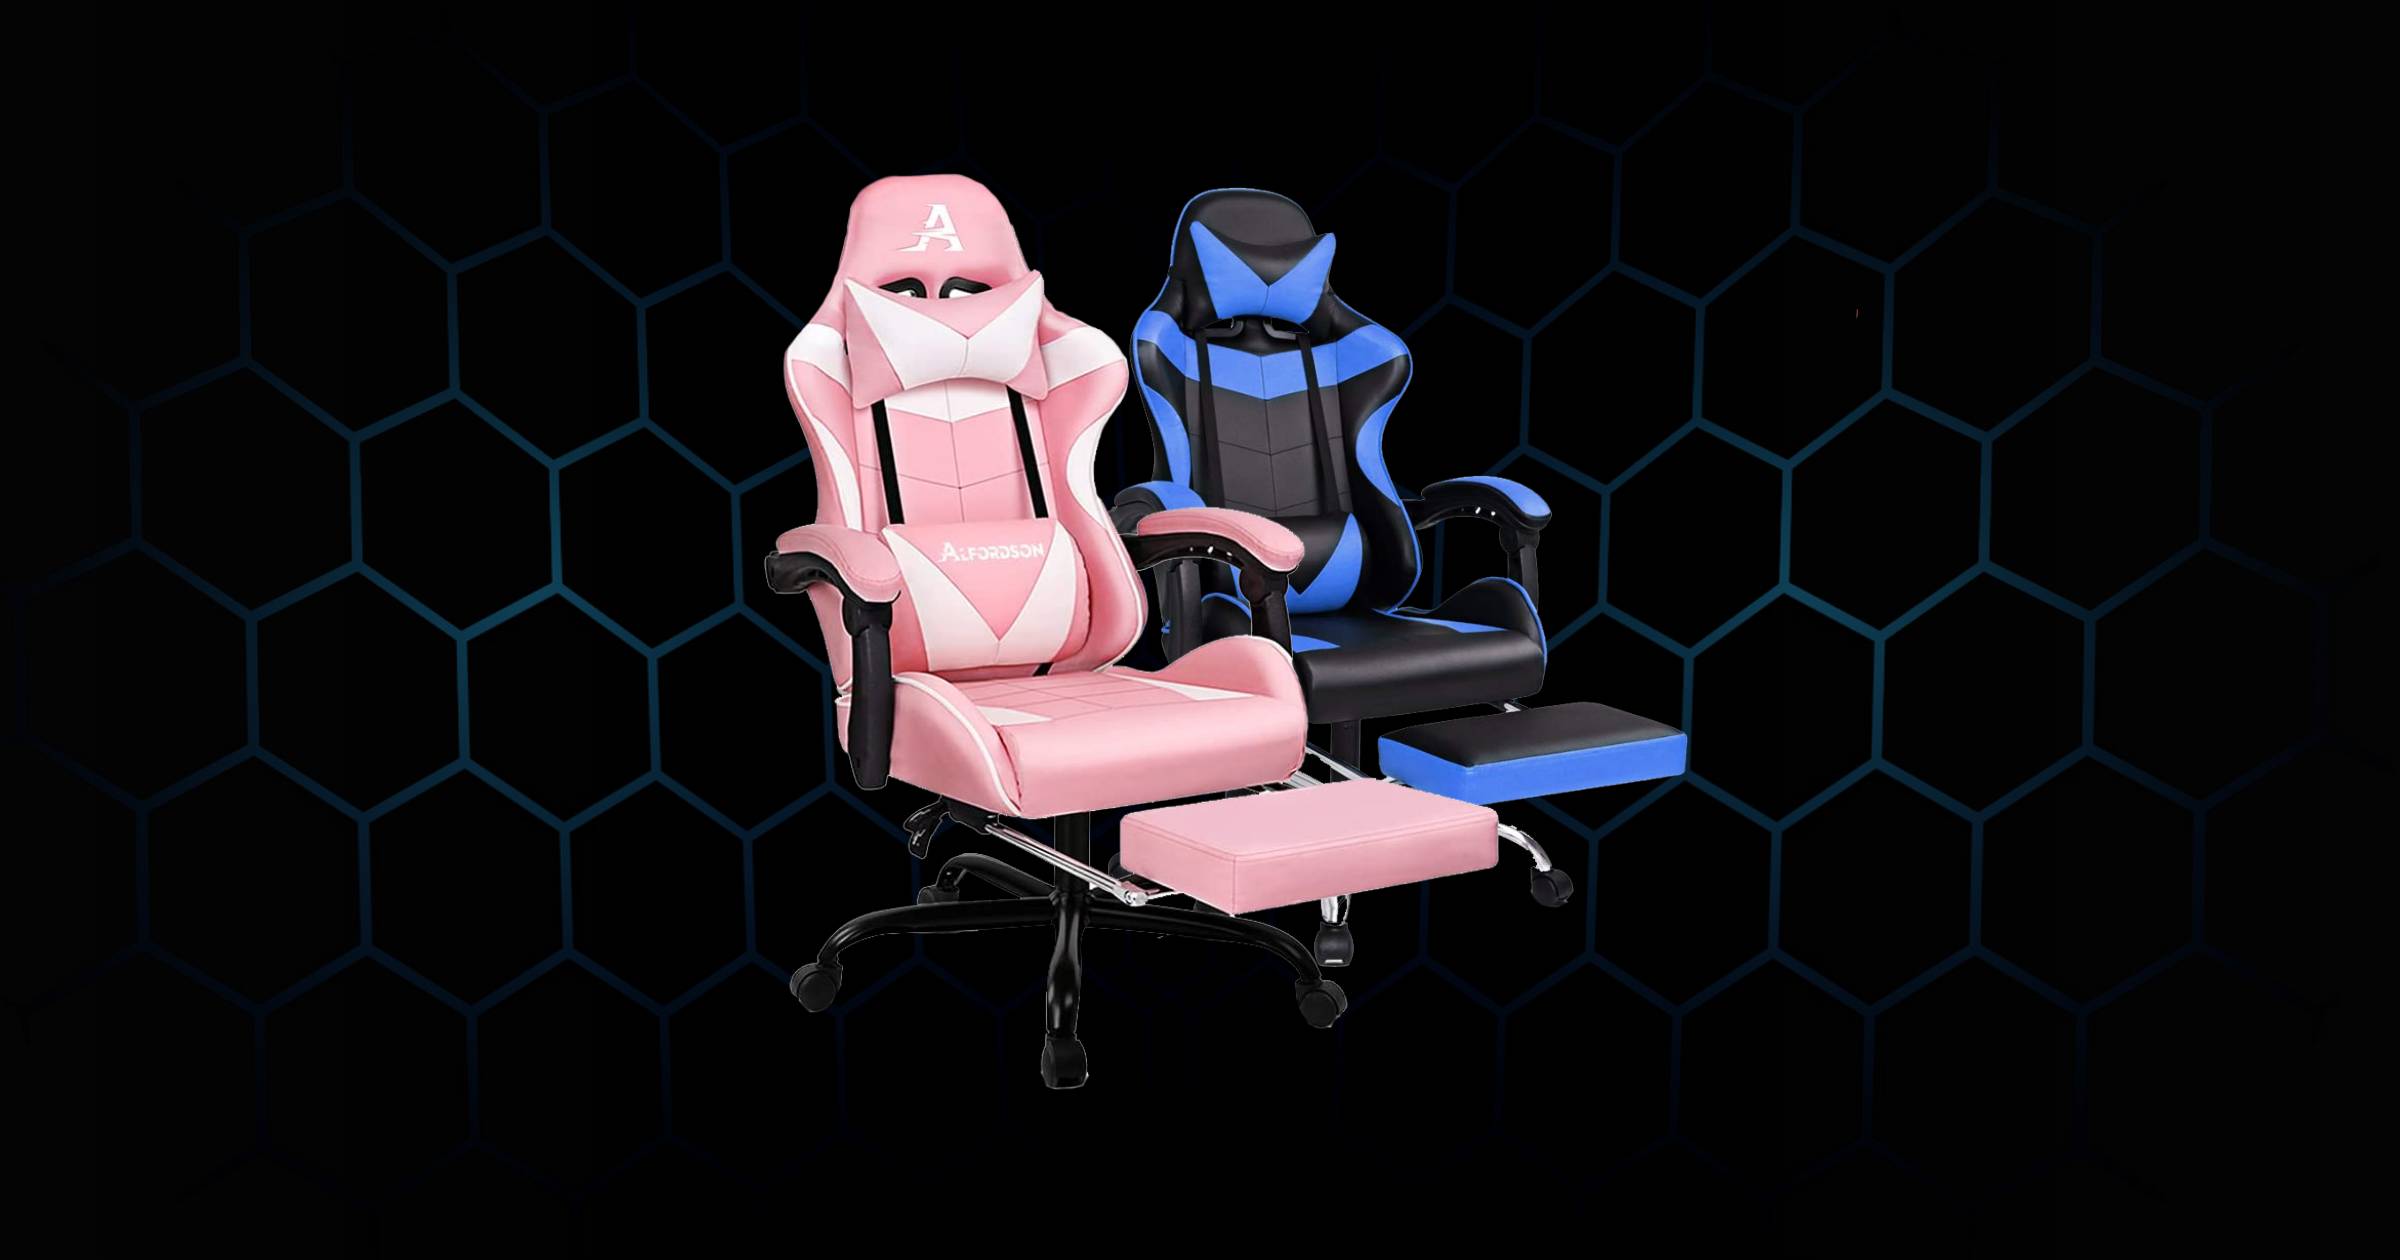 https://www.gamepro.com.au/wp-content/uploads/2022/09/alfordson-gaming-chair-review@2x.jpg